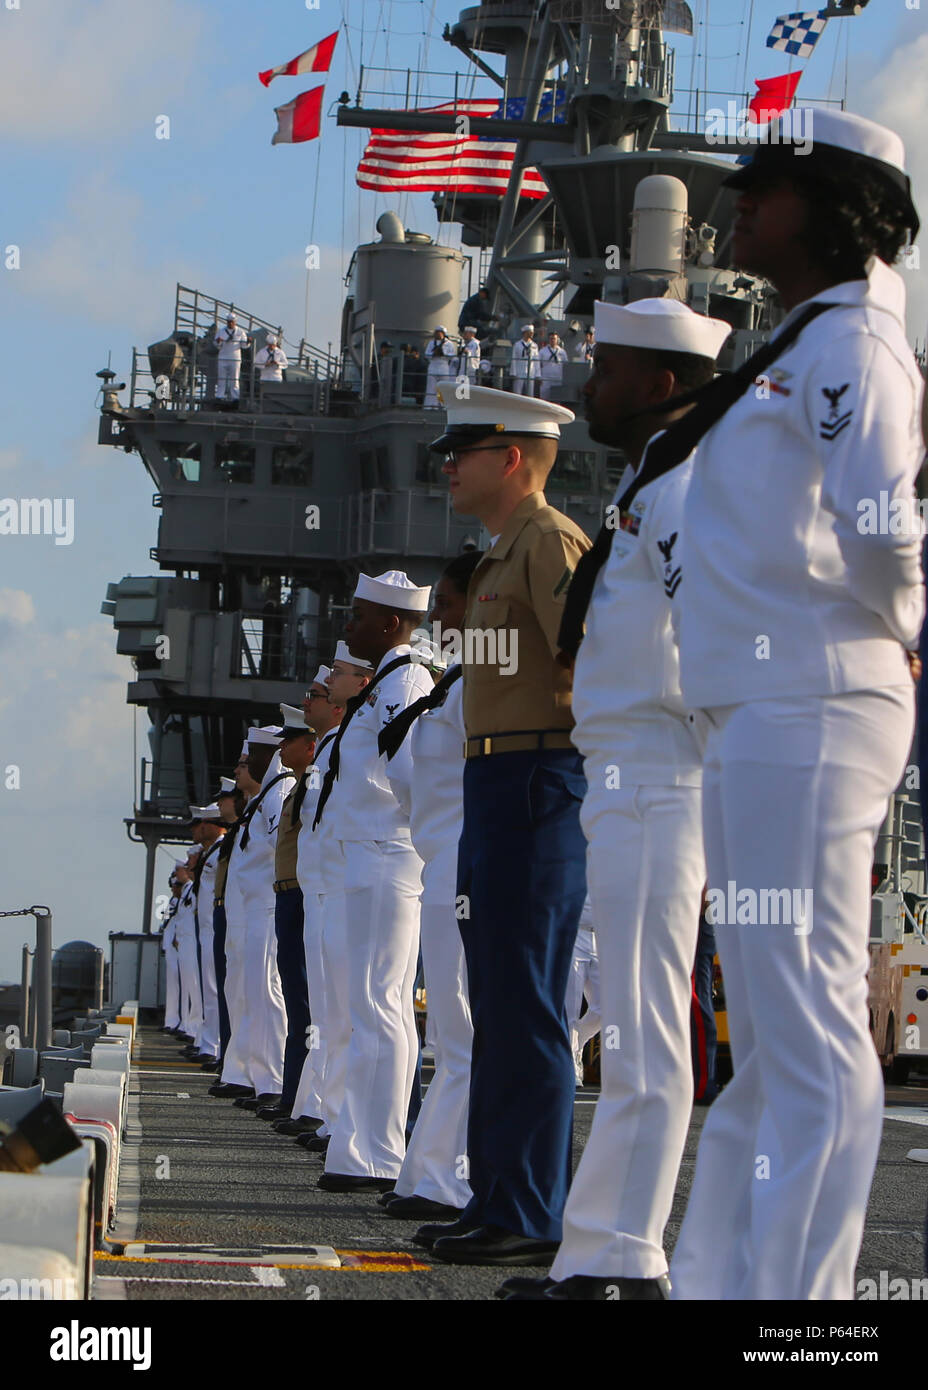 Marines and Sailors man the rails of the USS Bataan as they arrive at Fleet Week Port Everglades, Fla., May 2, 2016. Fleet Week, which takes place in Fort Lauderdale, Fla., from May 2-8, will give the community of South Florida the opportunity to interact with the Marines and Sailors of the ship as well as see up-close and personal some of the capabilities and equipment the Marine Corps employs.  (U.S. Marine Corps photo by Cpl. Michelle Reif/Released.) Stock Photo